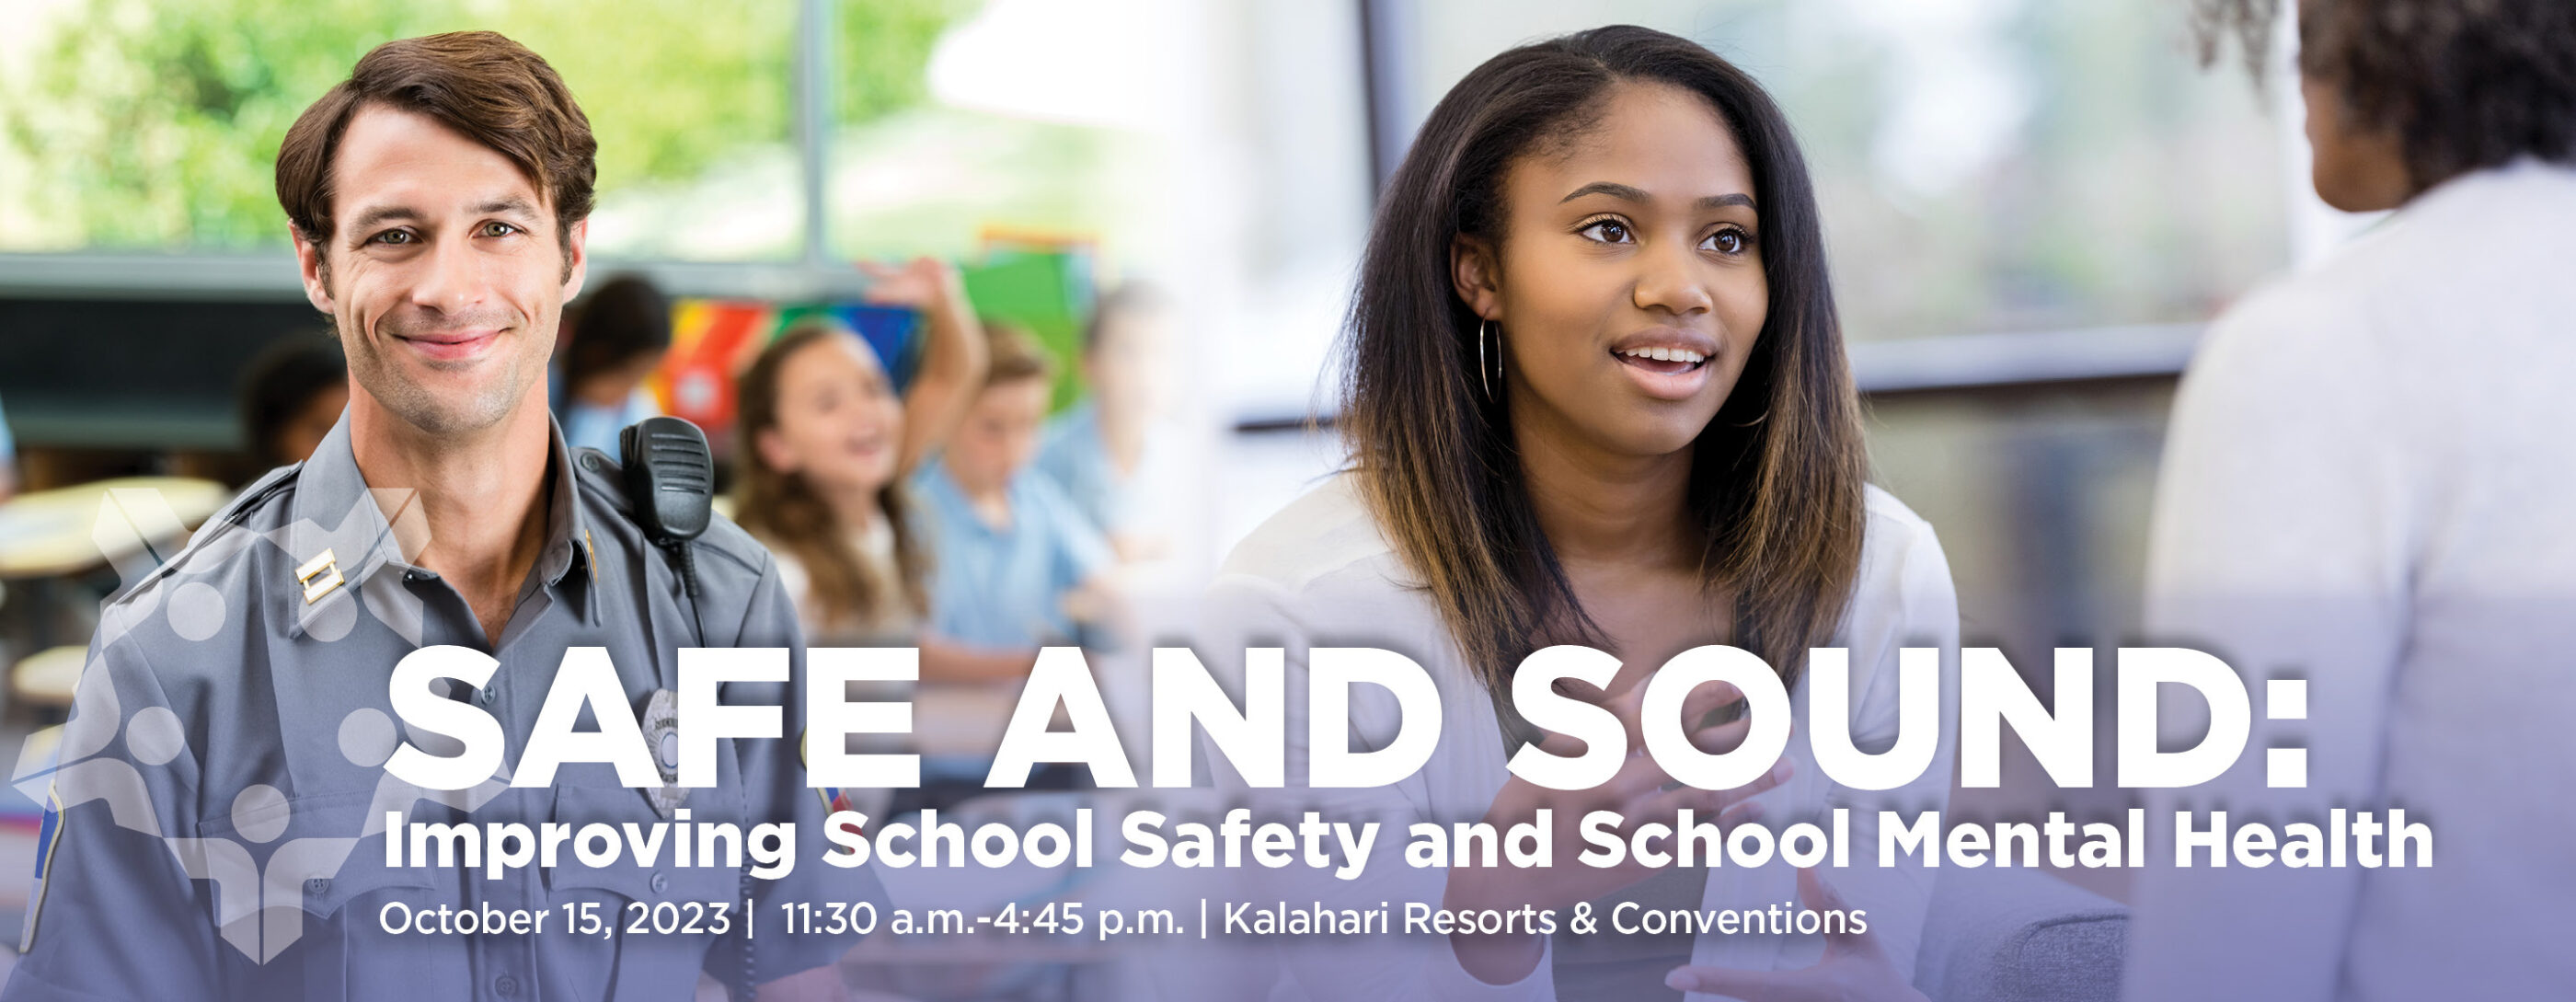 Safe and Sound pre-conference on October 15